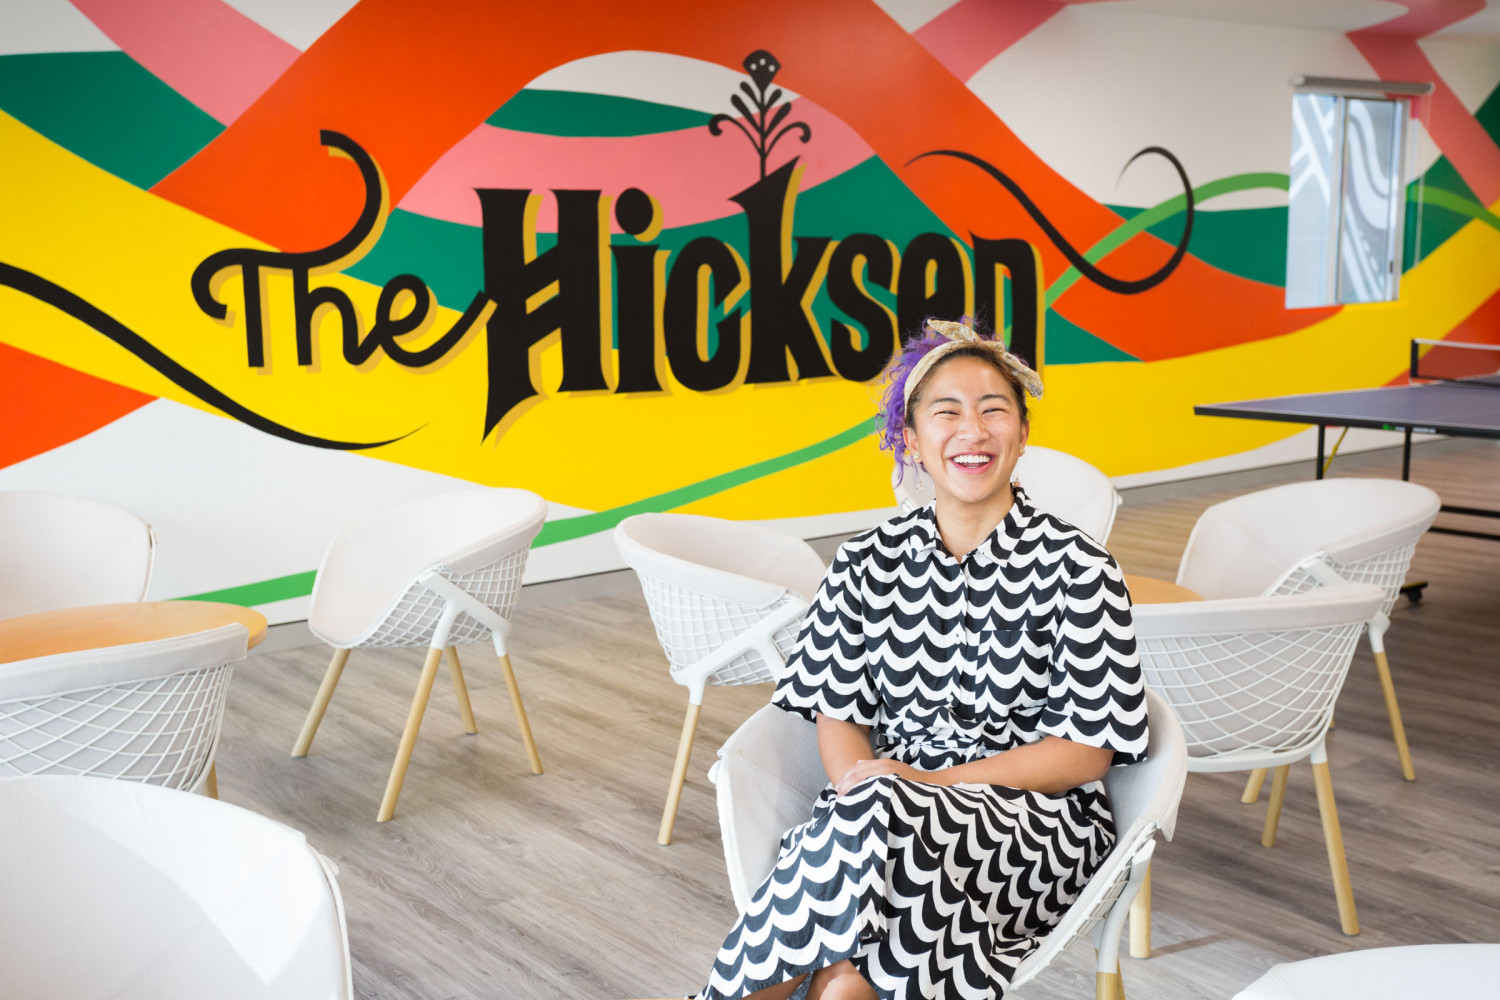 Artist Angelica Catalan in front of her mural 'The Hickson'